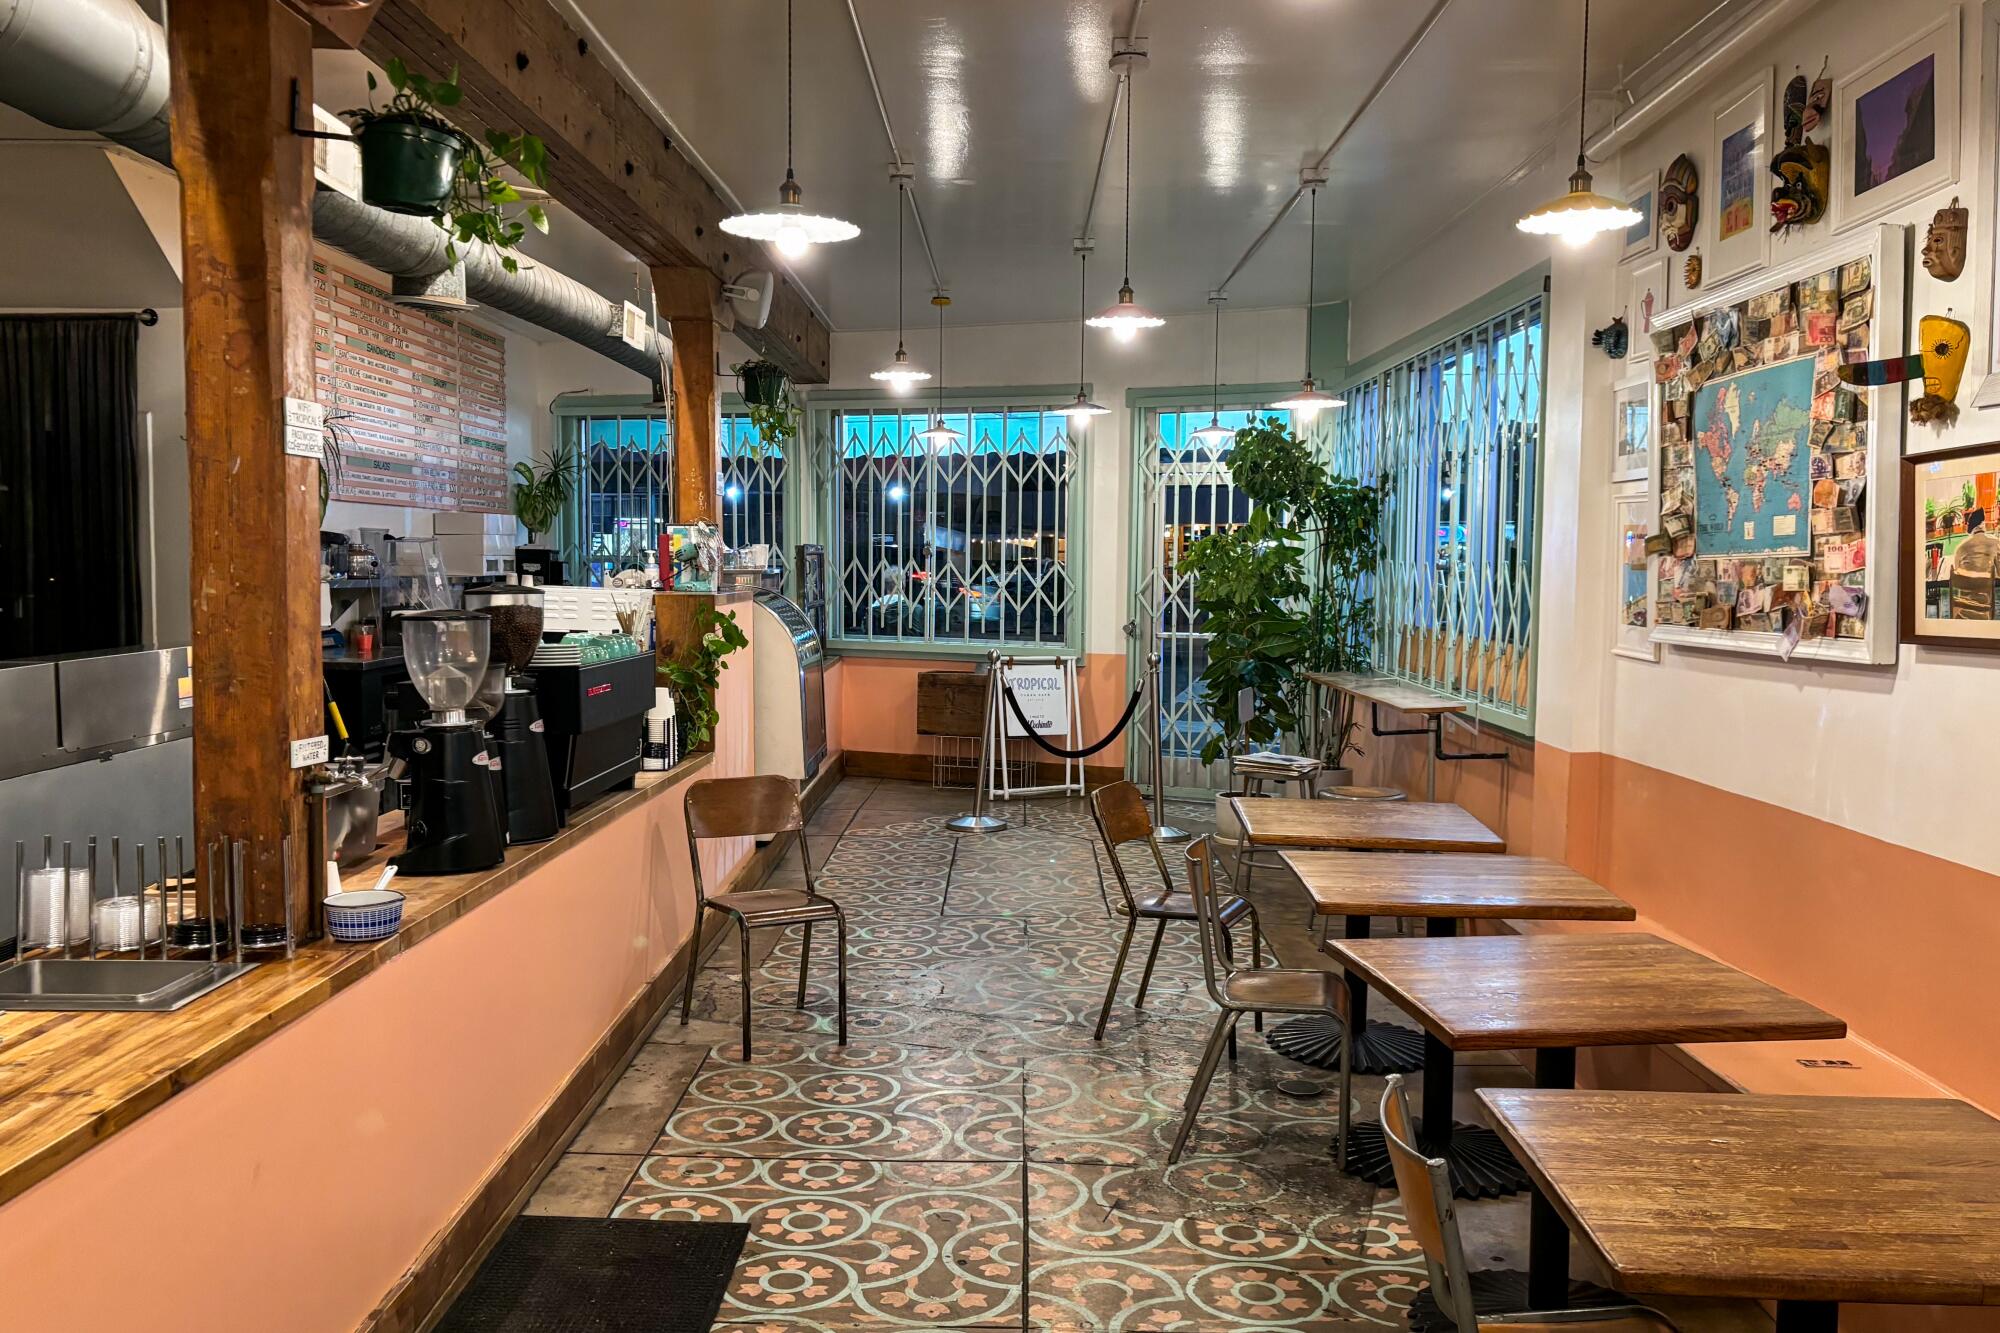 An interior view of Café Tropical on its last day.